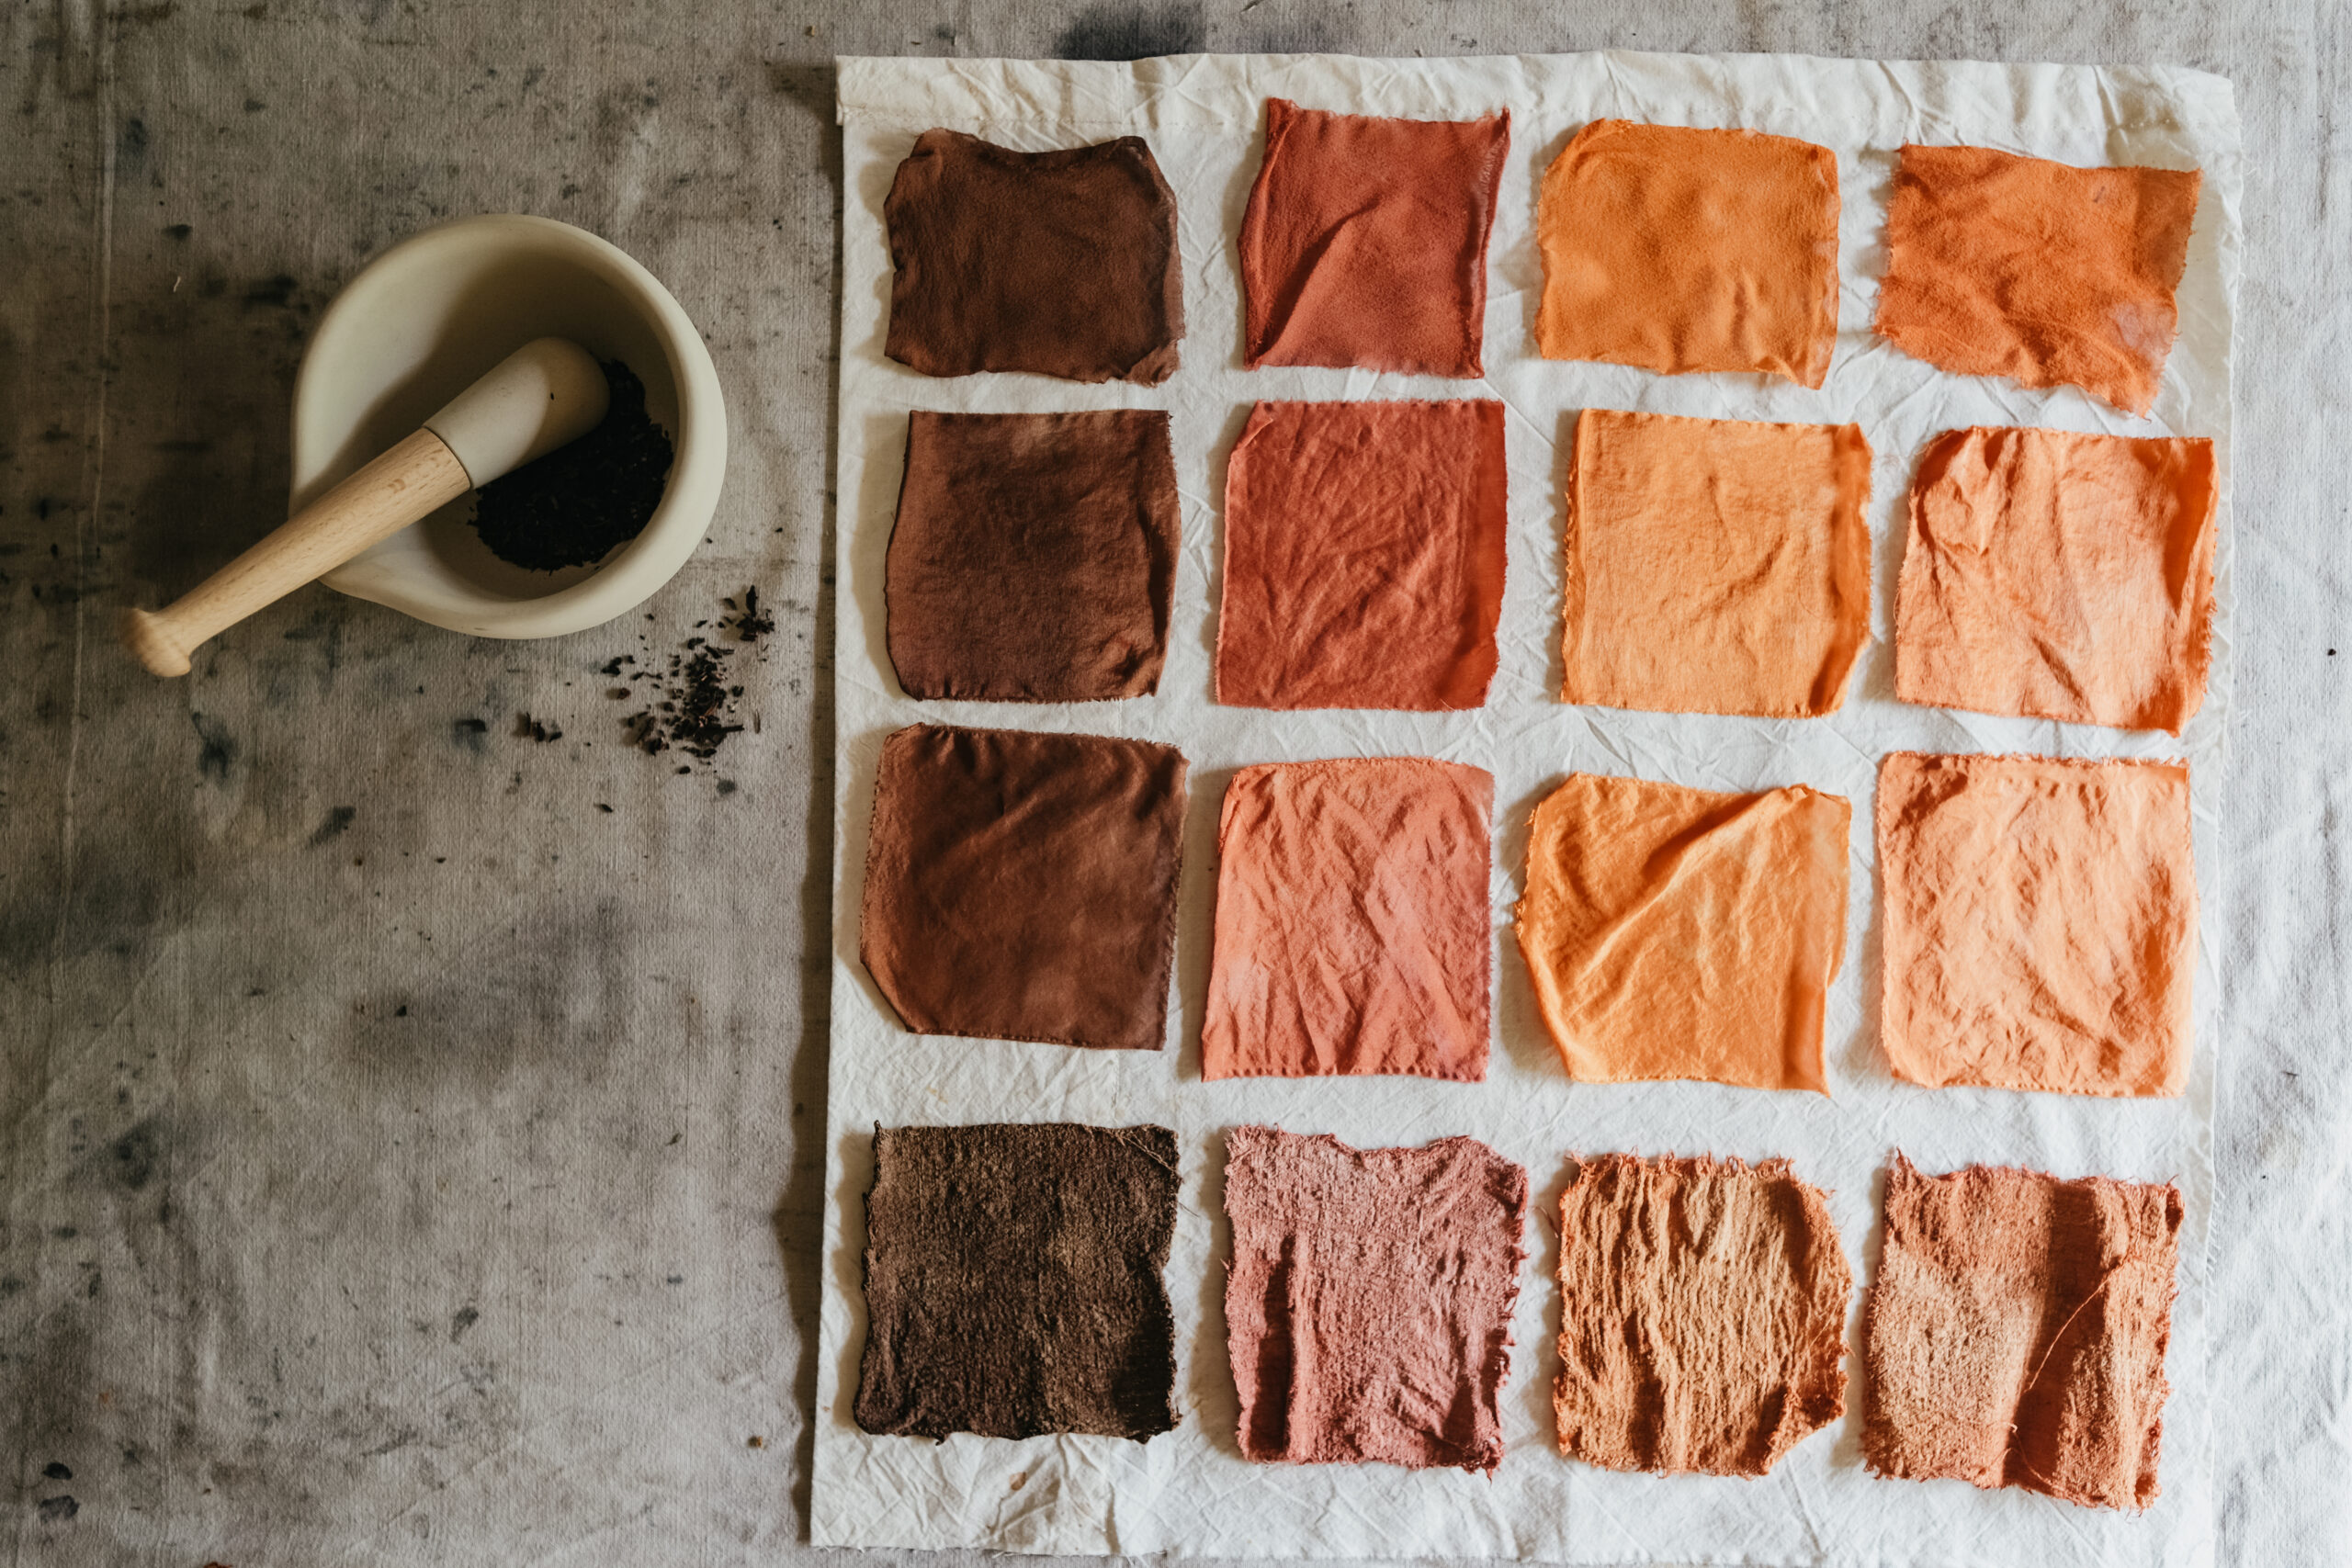 Online Natural Dye Workshop by Herbal Academy - dyeing with plants